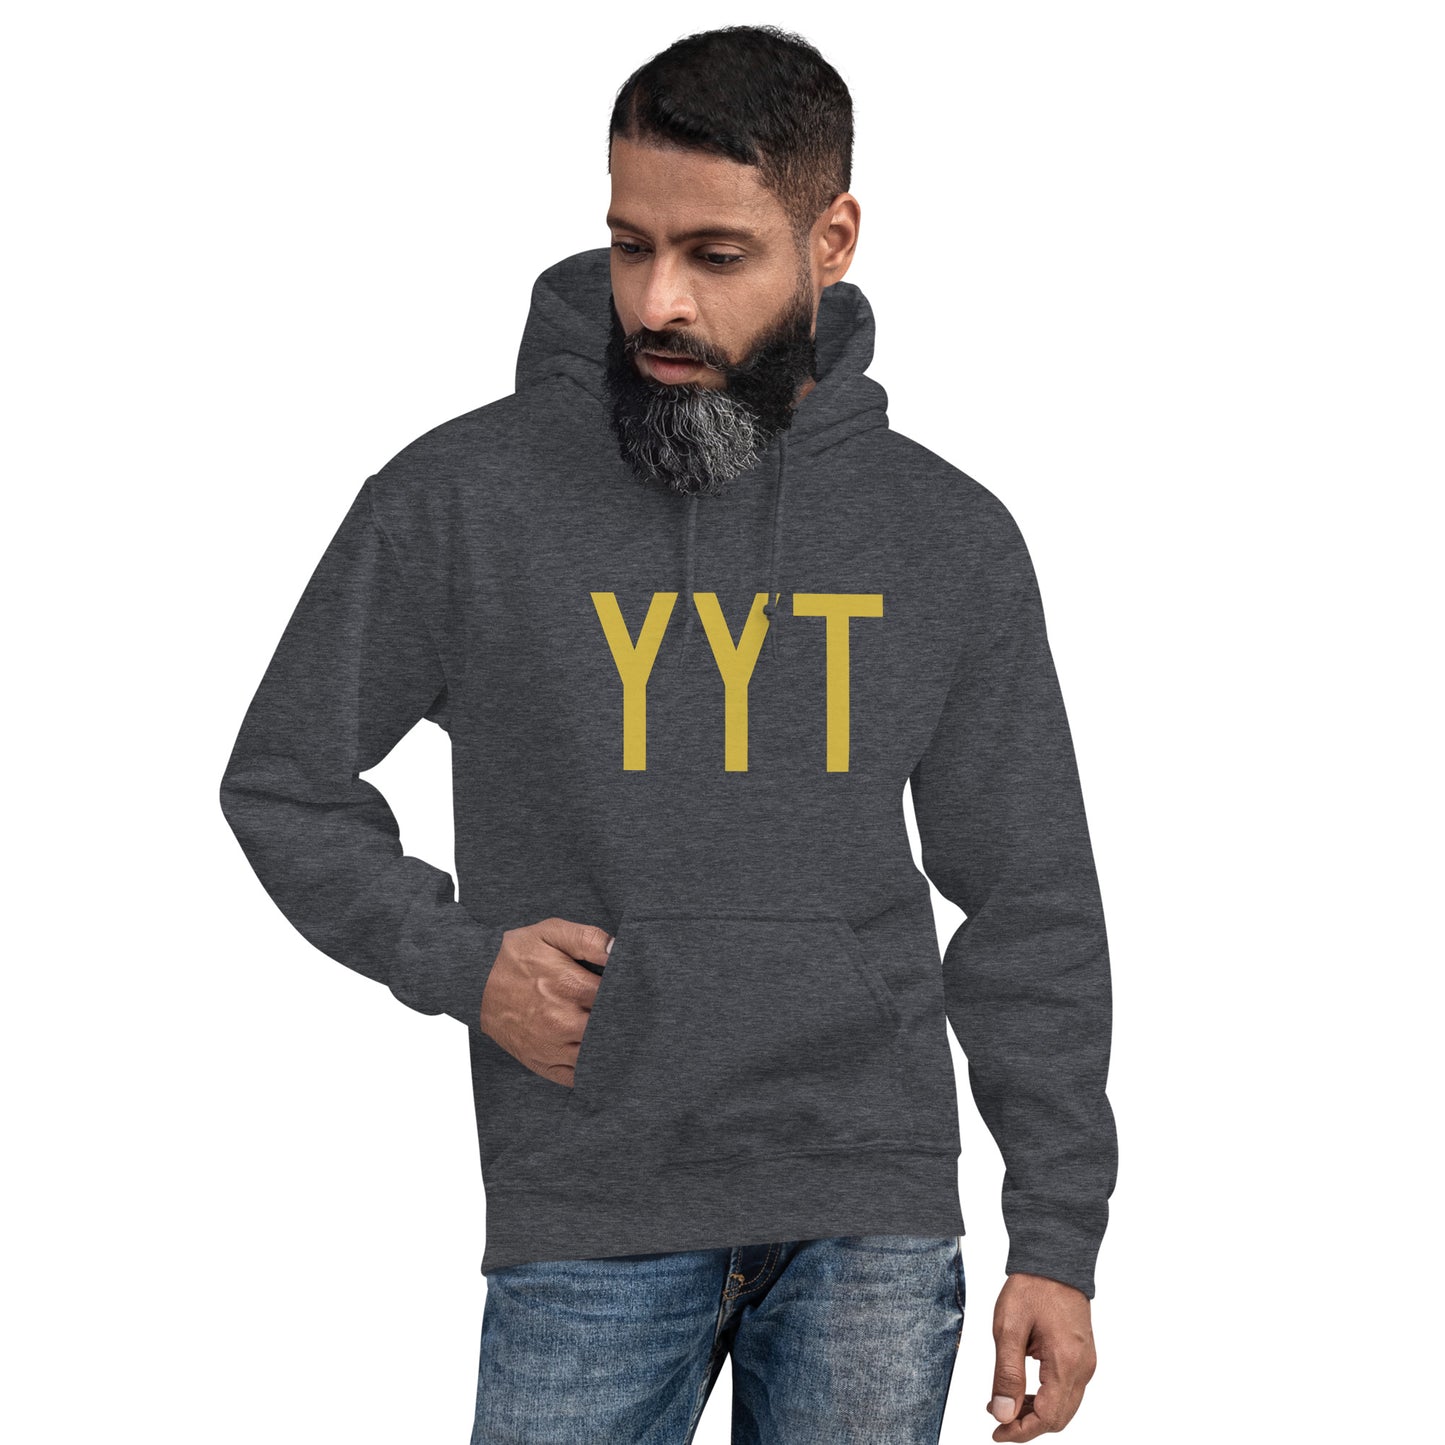 Aviation Gift Unisex Hoodie - Old Gold Graphic • YYT St. John's • YHM Designs - Image 05